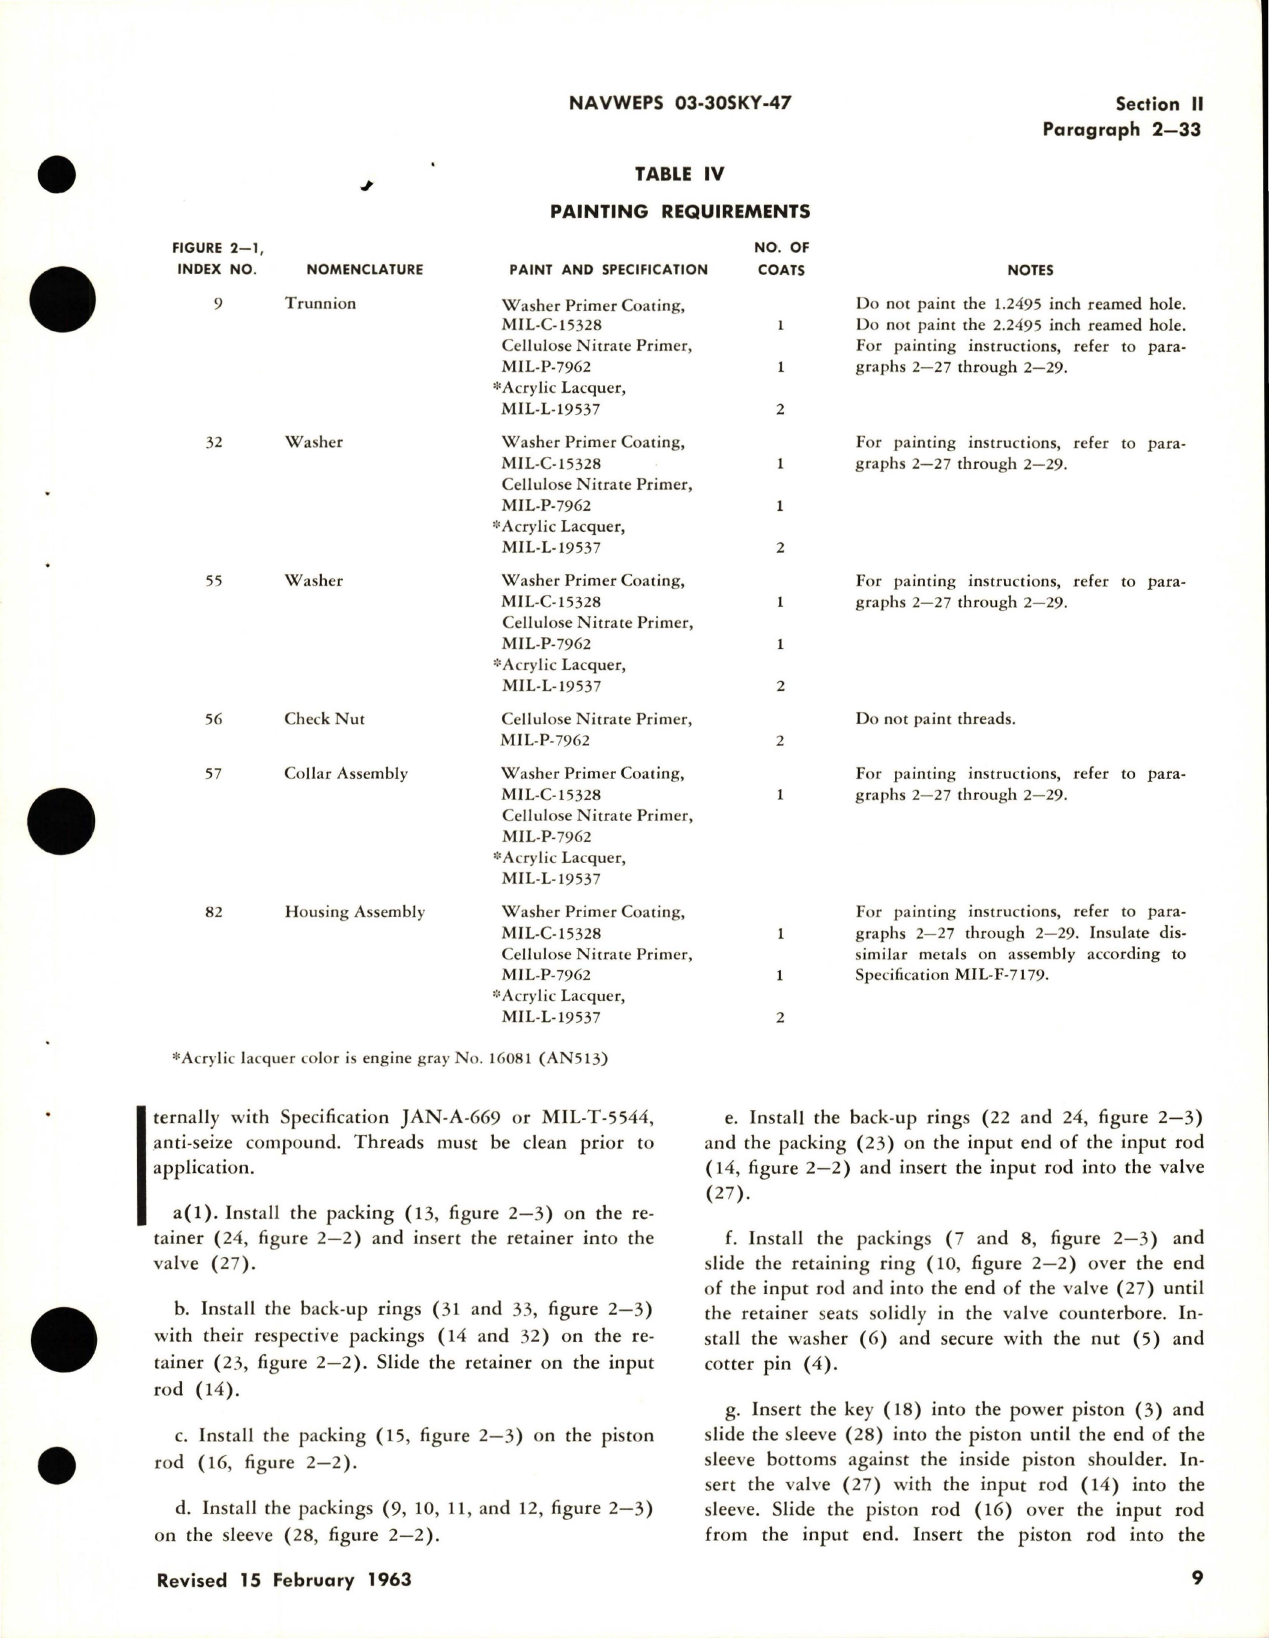 Sample page 7 from AirCorps Library document: Overhaul Instructions for Primary Servocylinder Assembly